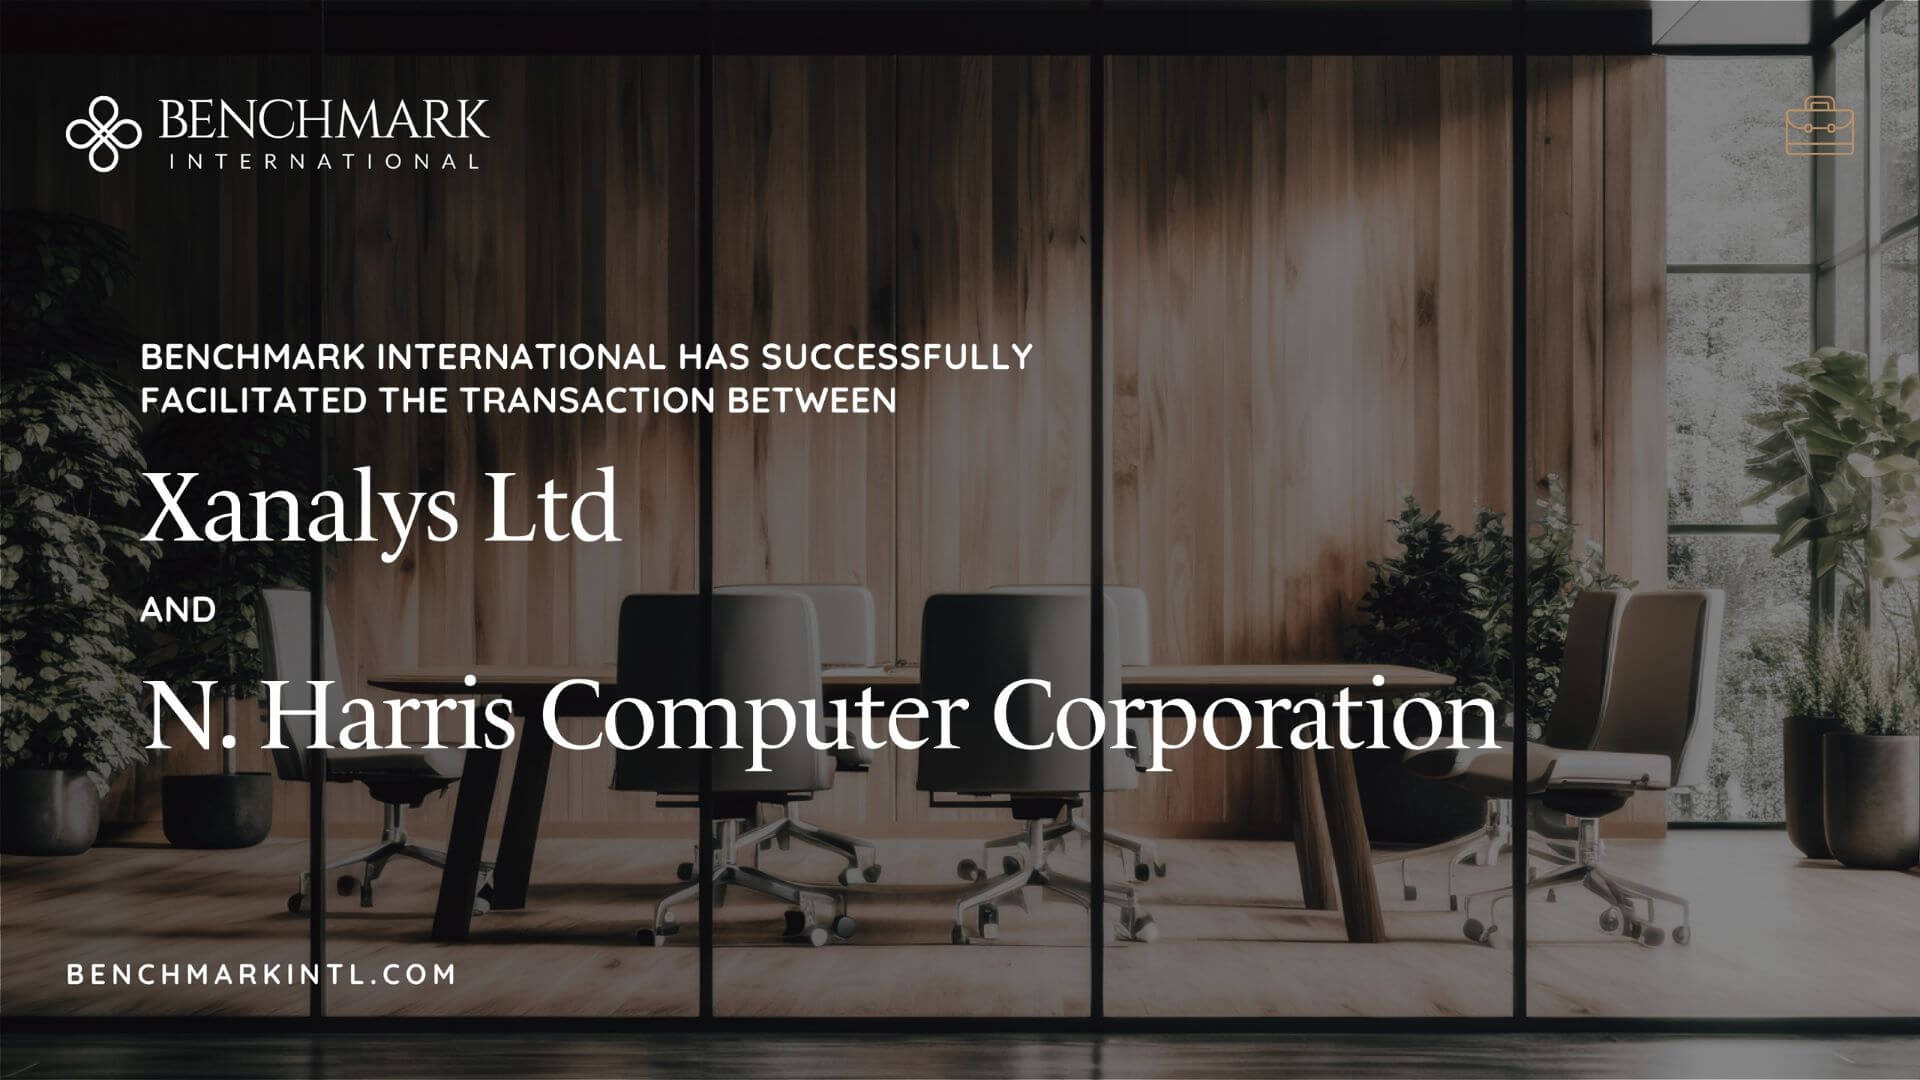 Benchmark International Successfully Facilitated the Transaction Between Xanalys Ltd and N. Harris Computer Corporation